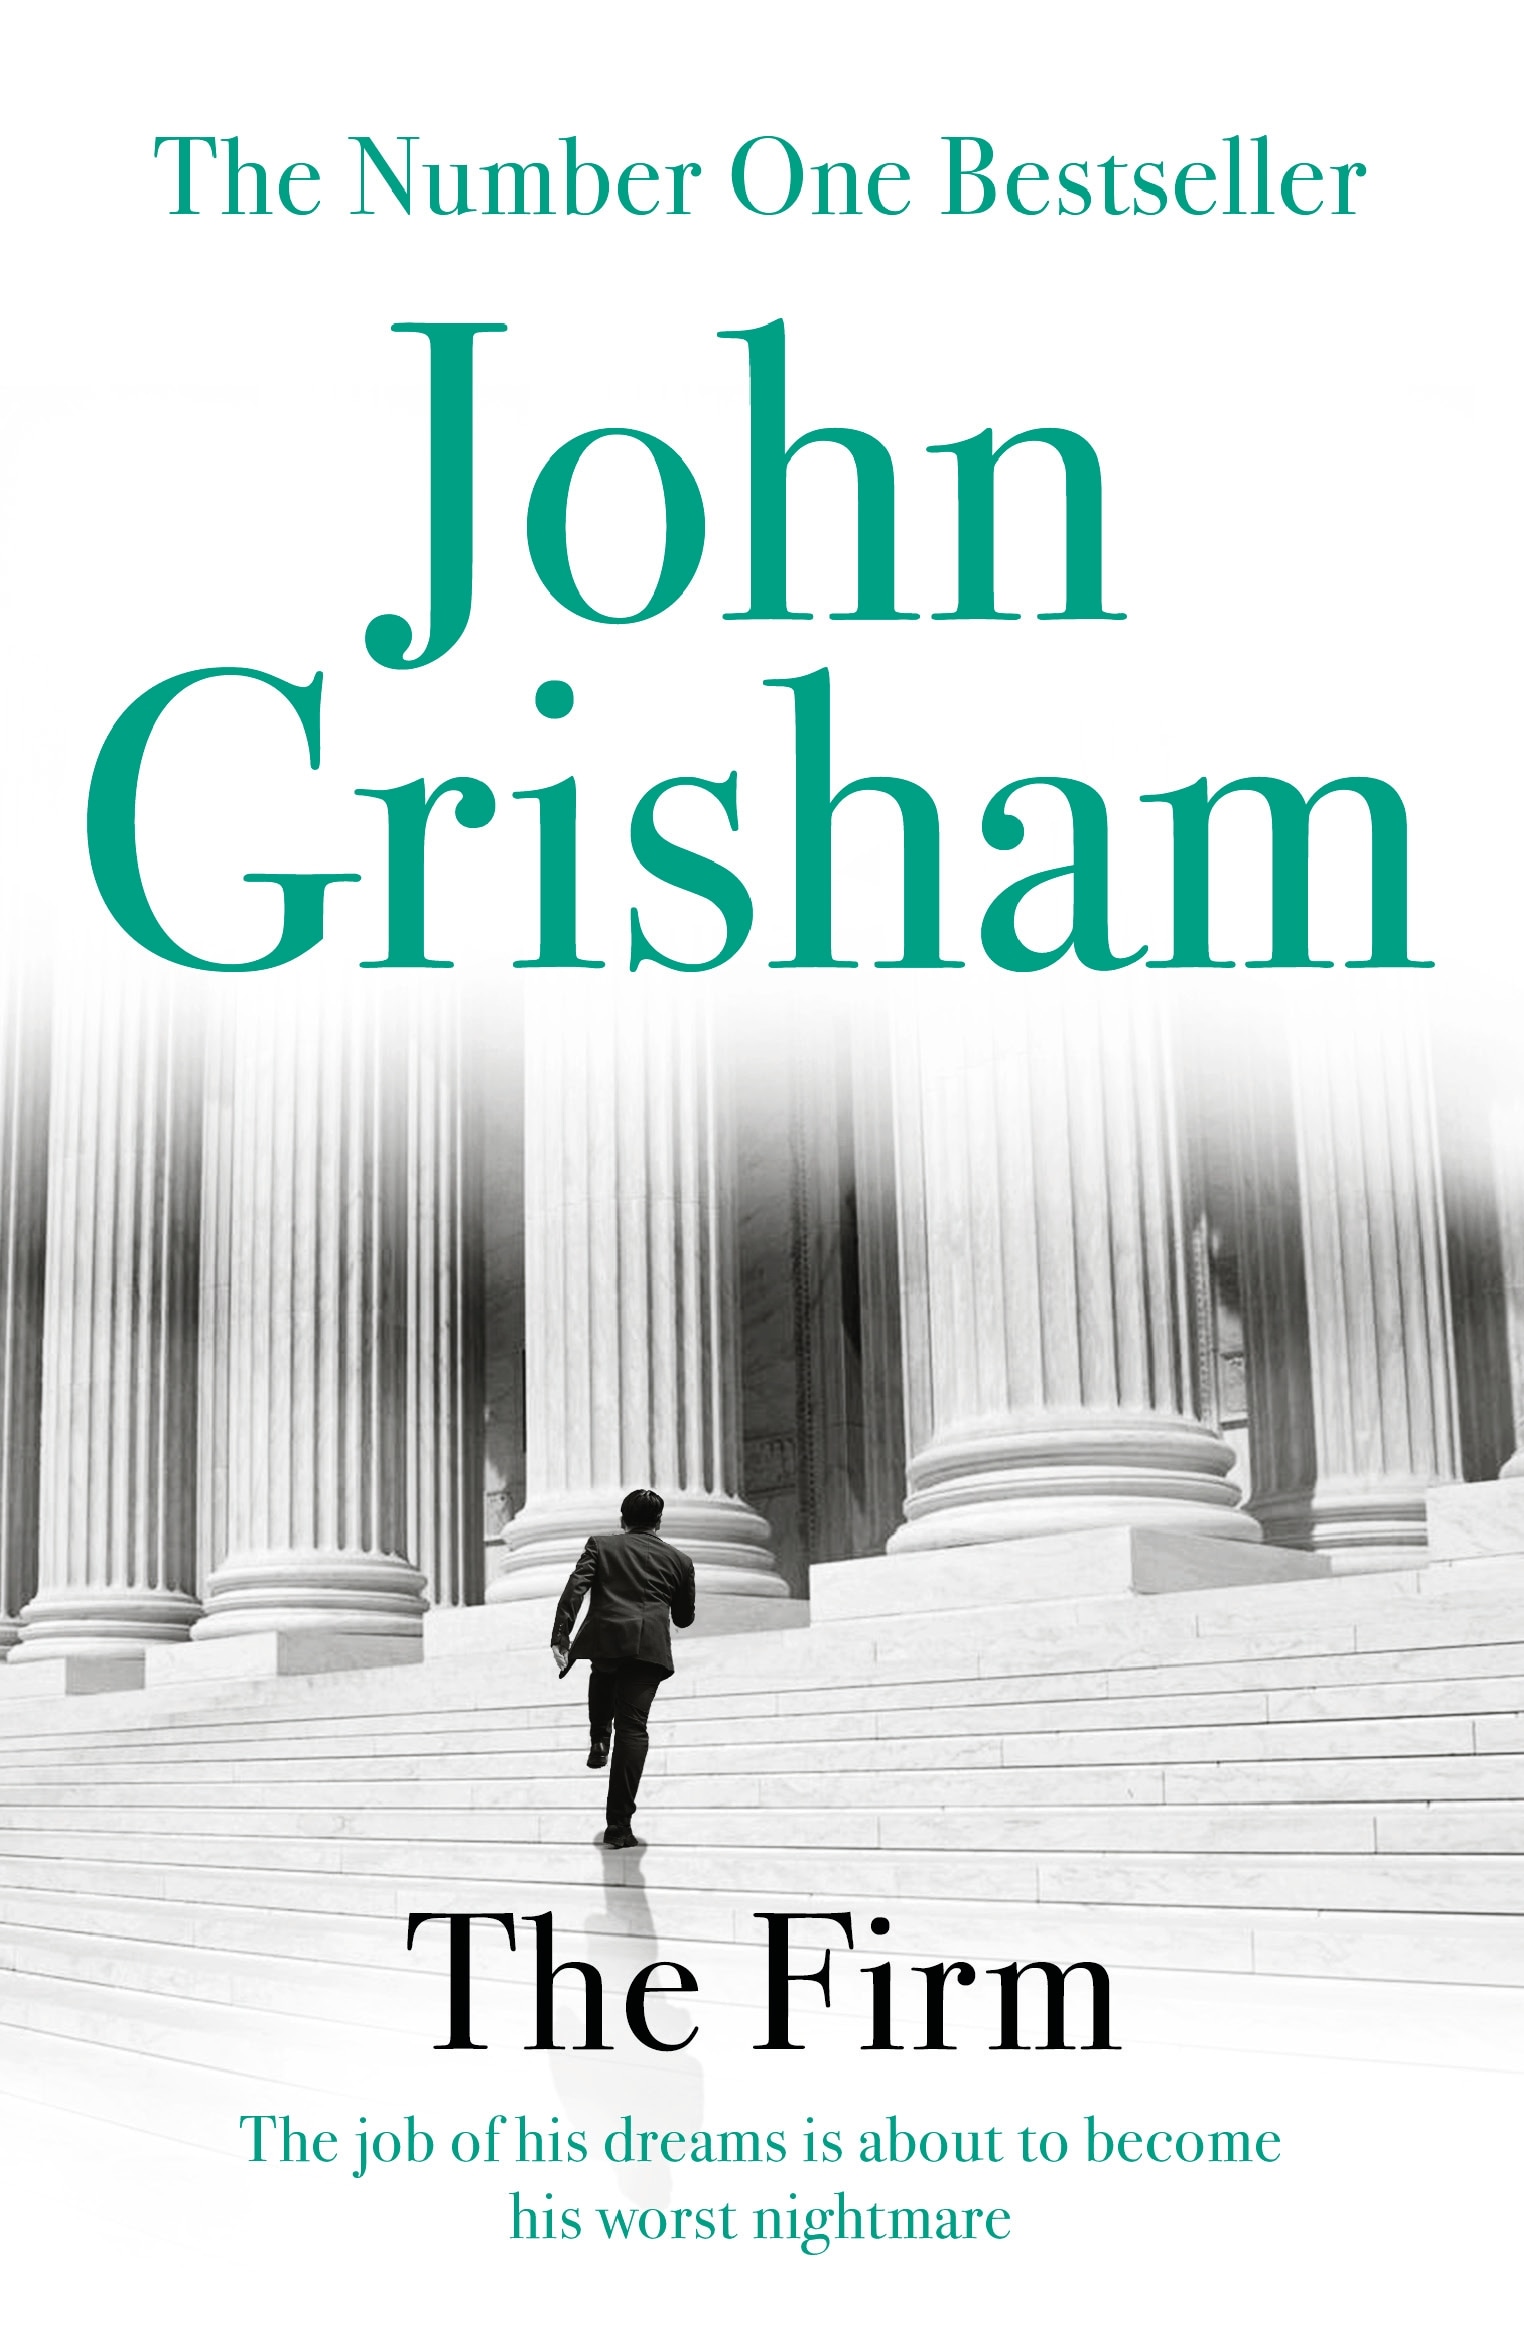 Book “The Firm” by John Grisham — October 28, 2010